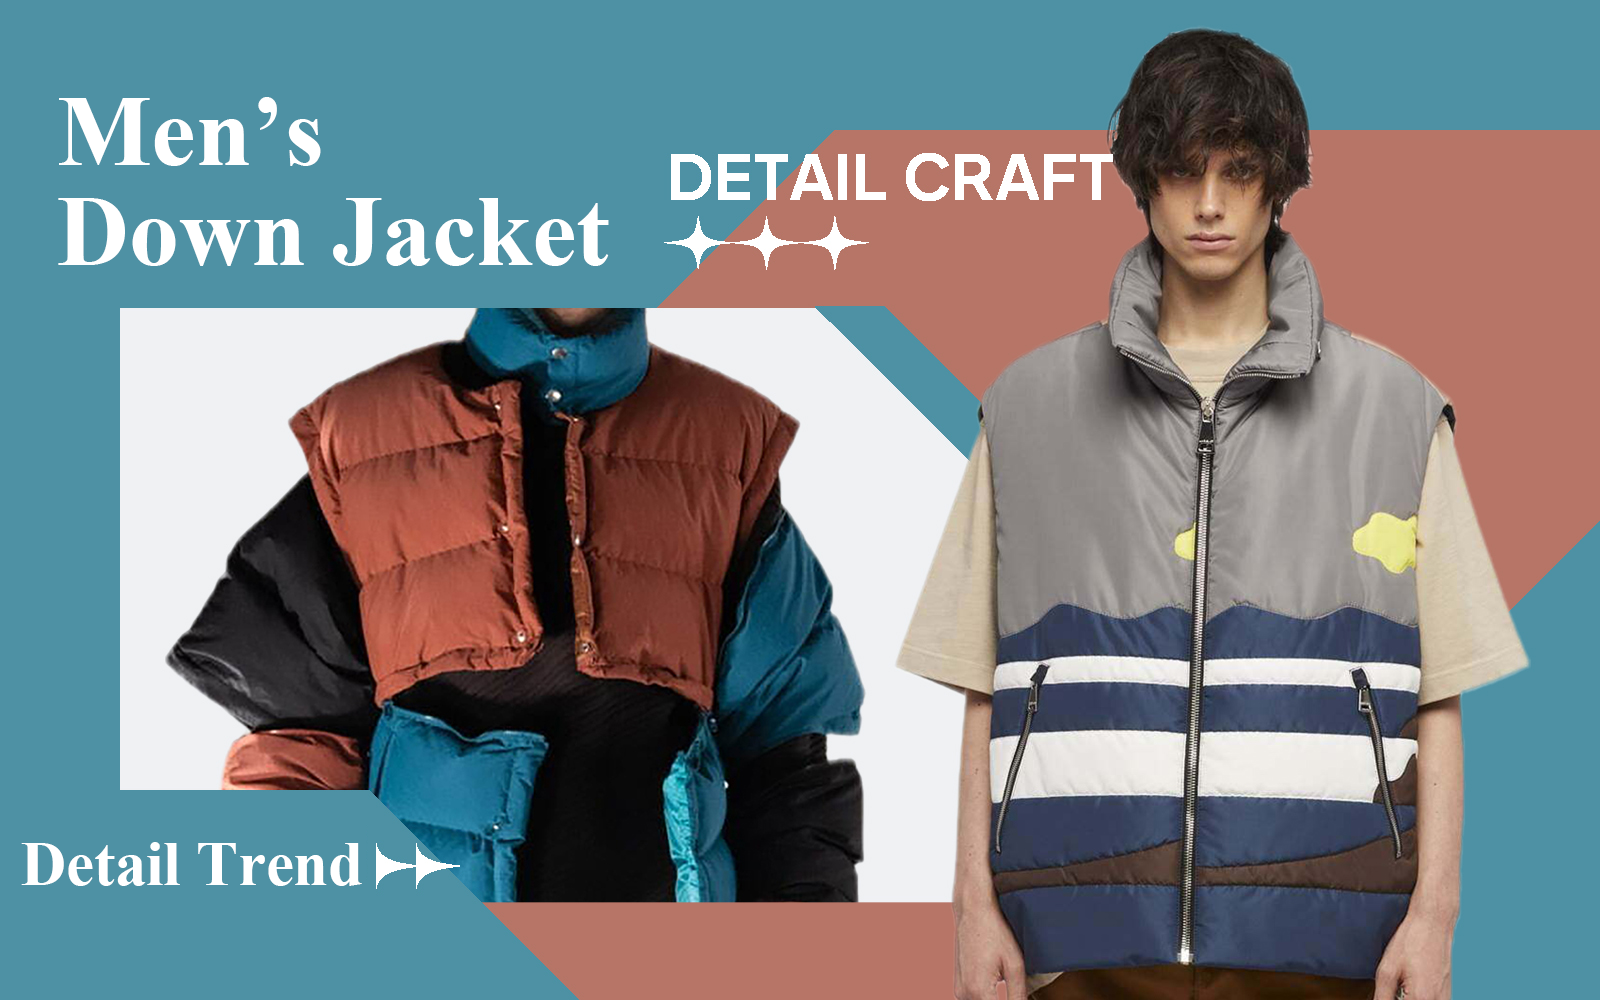 Deconstruction & Splicing -- The Detail & Craft Trend for Men's Down Jacket